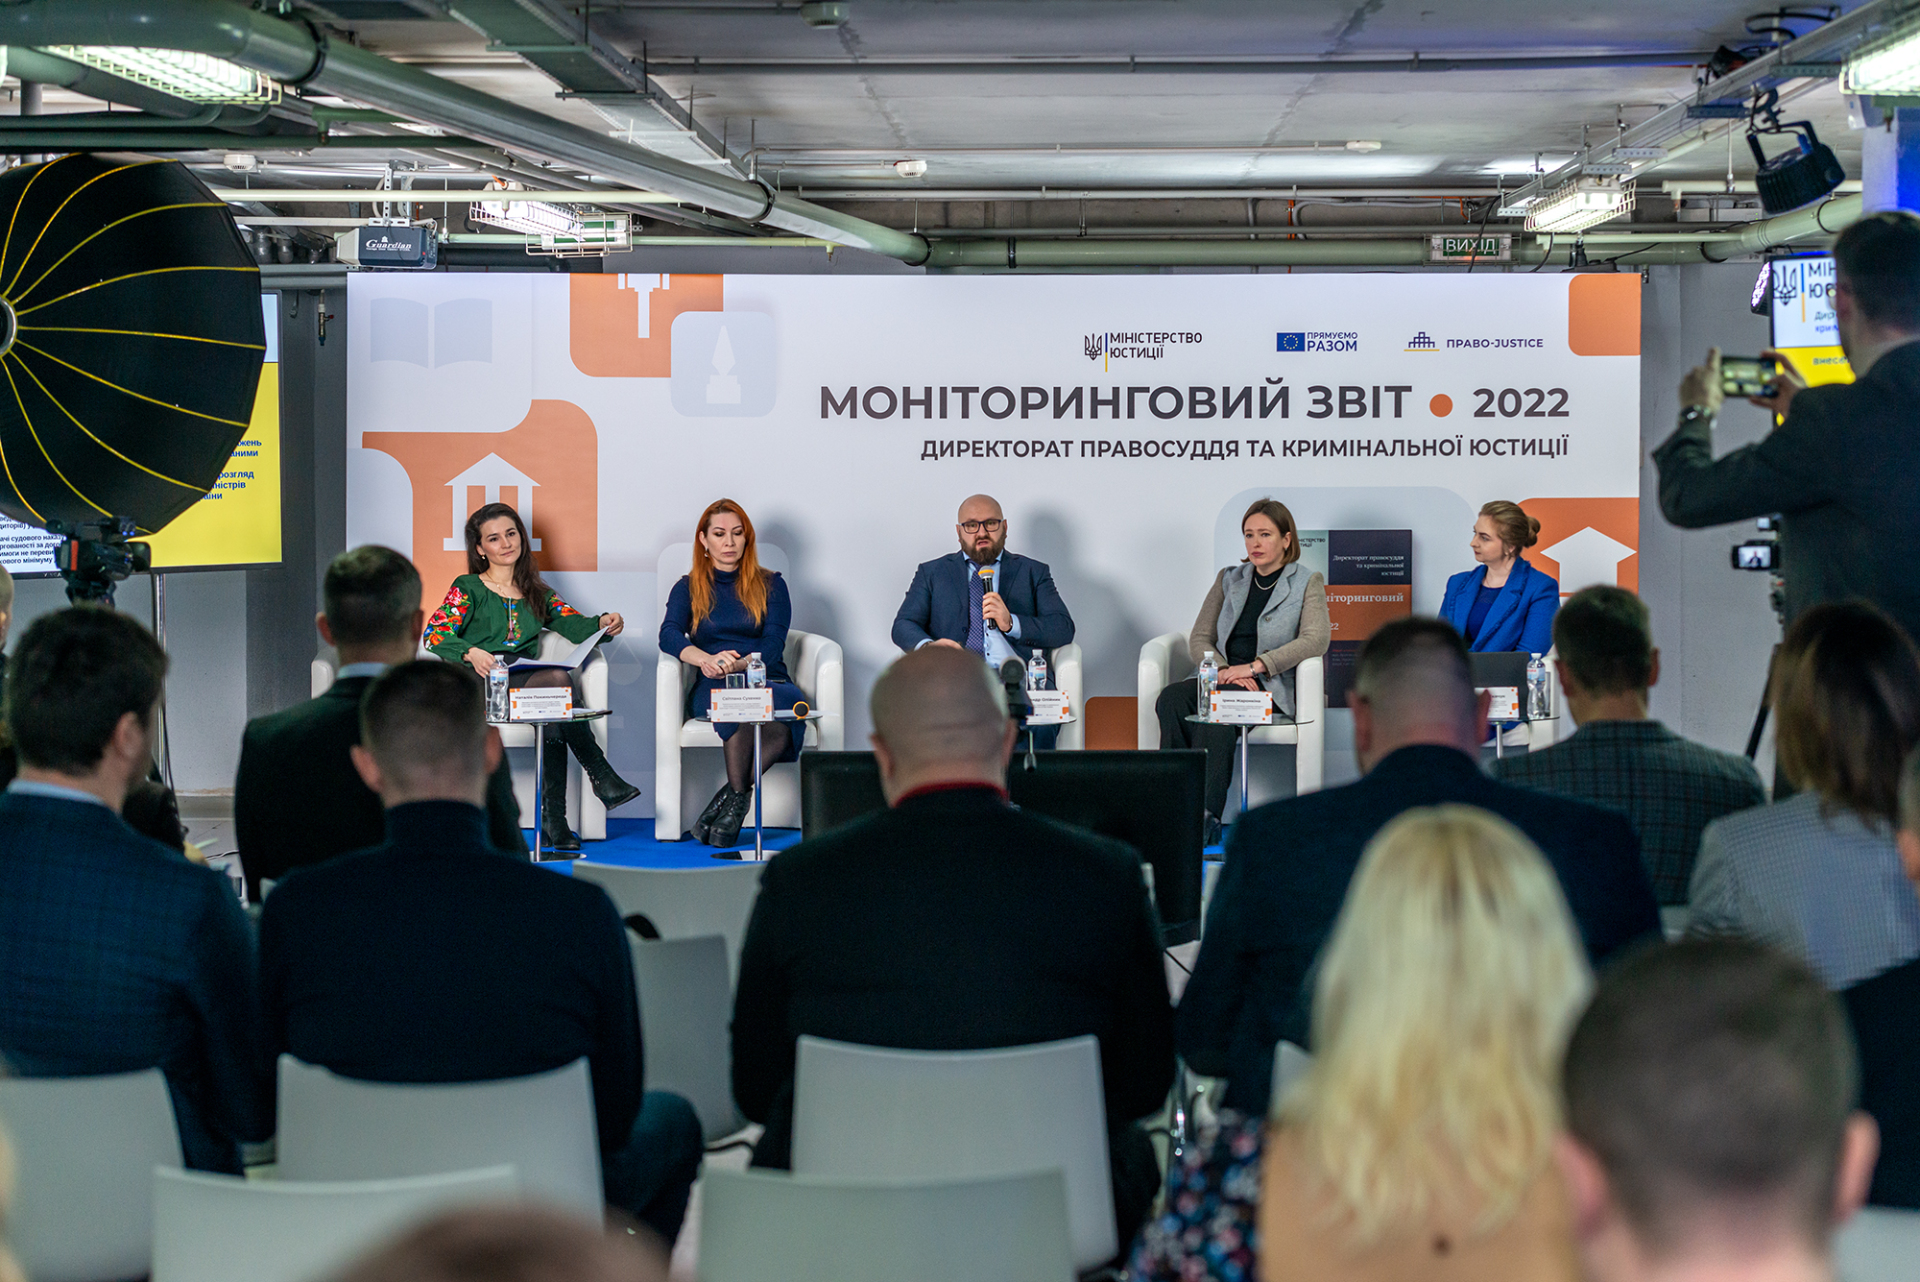 With the support of the EU Project Pravo-Justice, a monitoring report as to enforcing judgments by the Ministry of Justice of Ukraine was presented